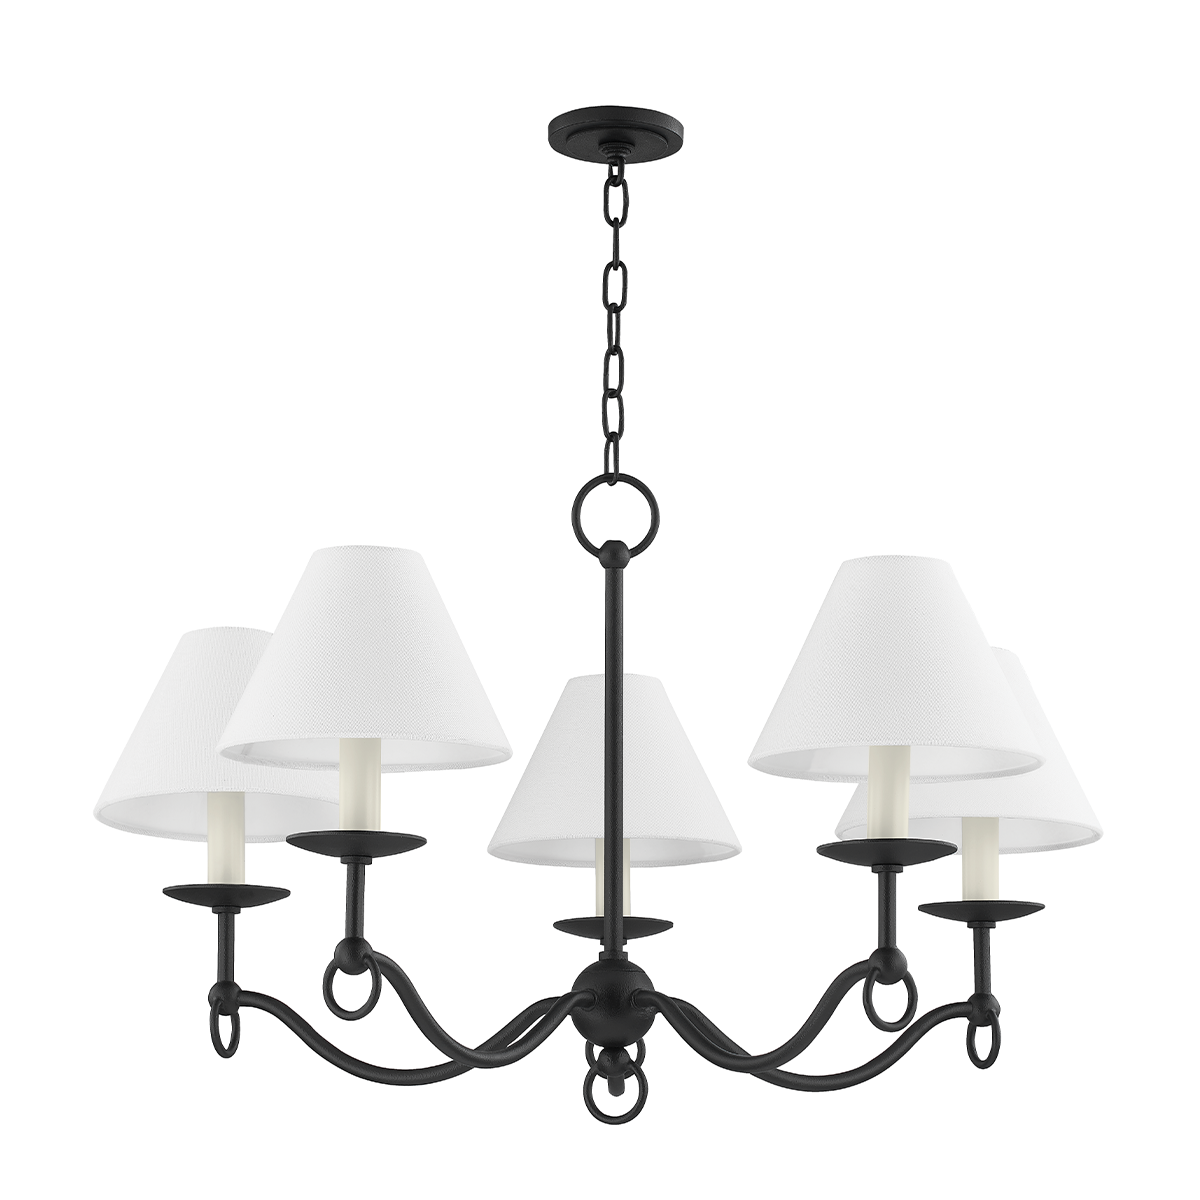 Forged Iron Curve Arm with Linen White Shade Chandelier